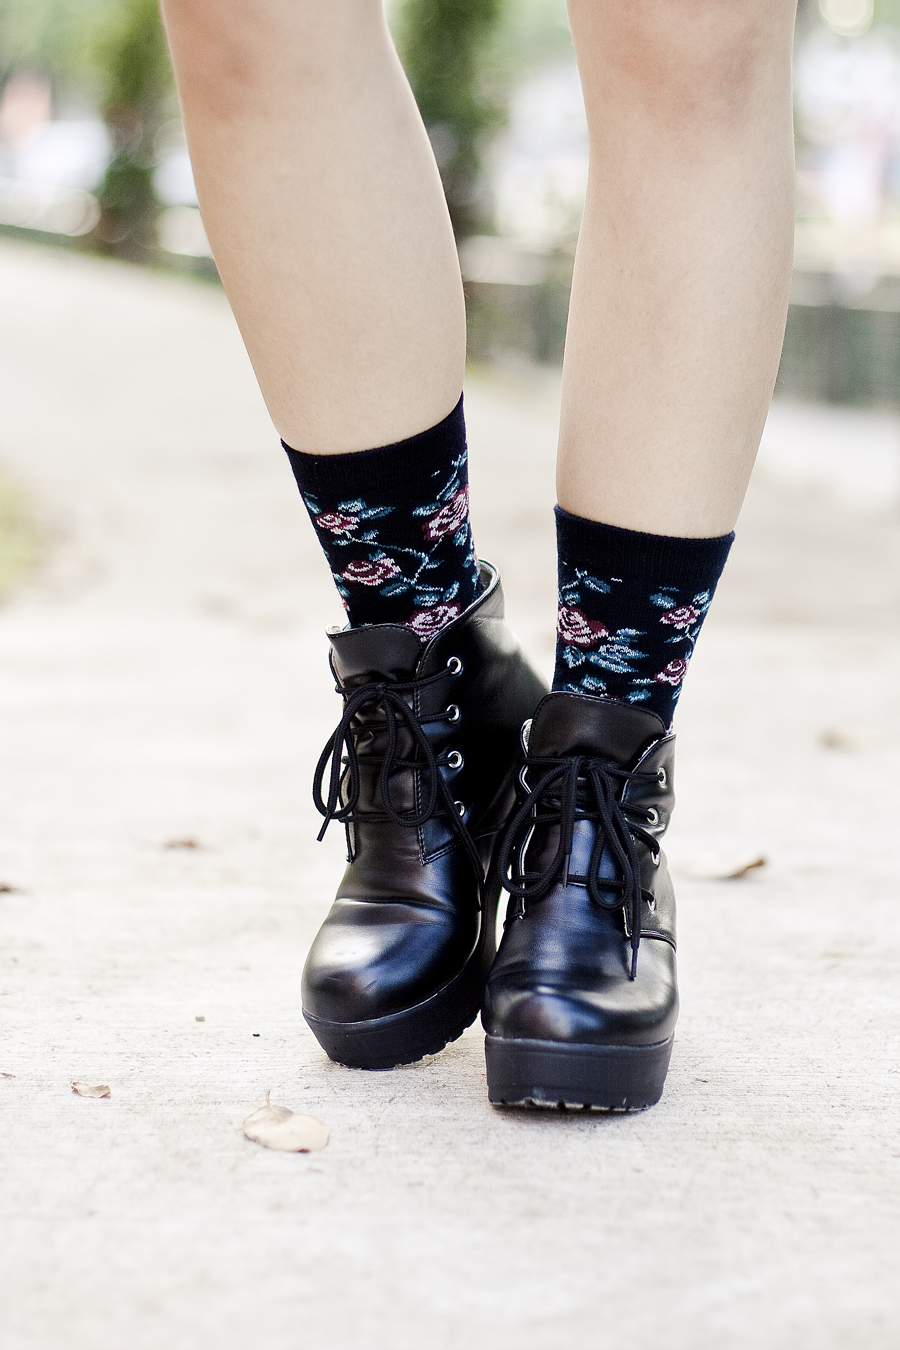 Black floral socks from Taobao, black platform shoes from Taobao.